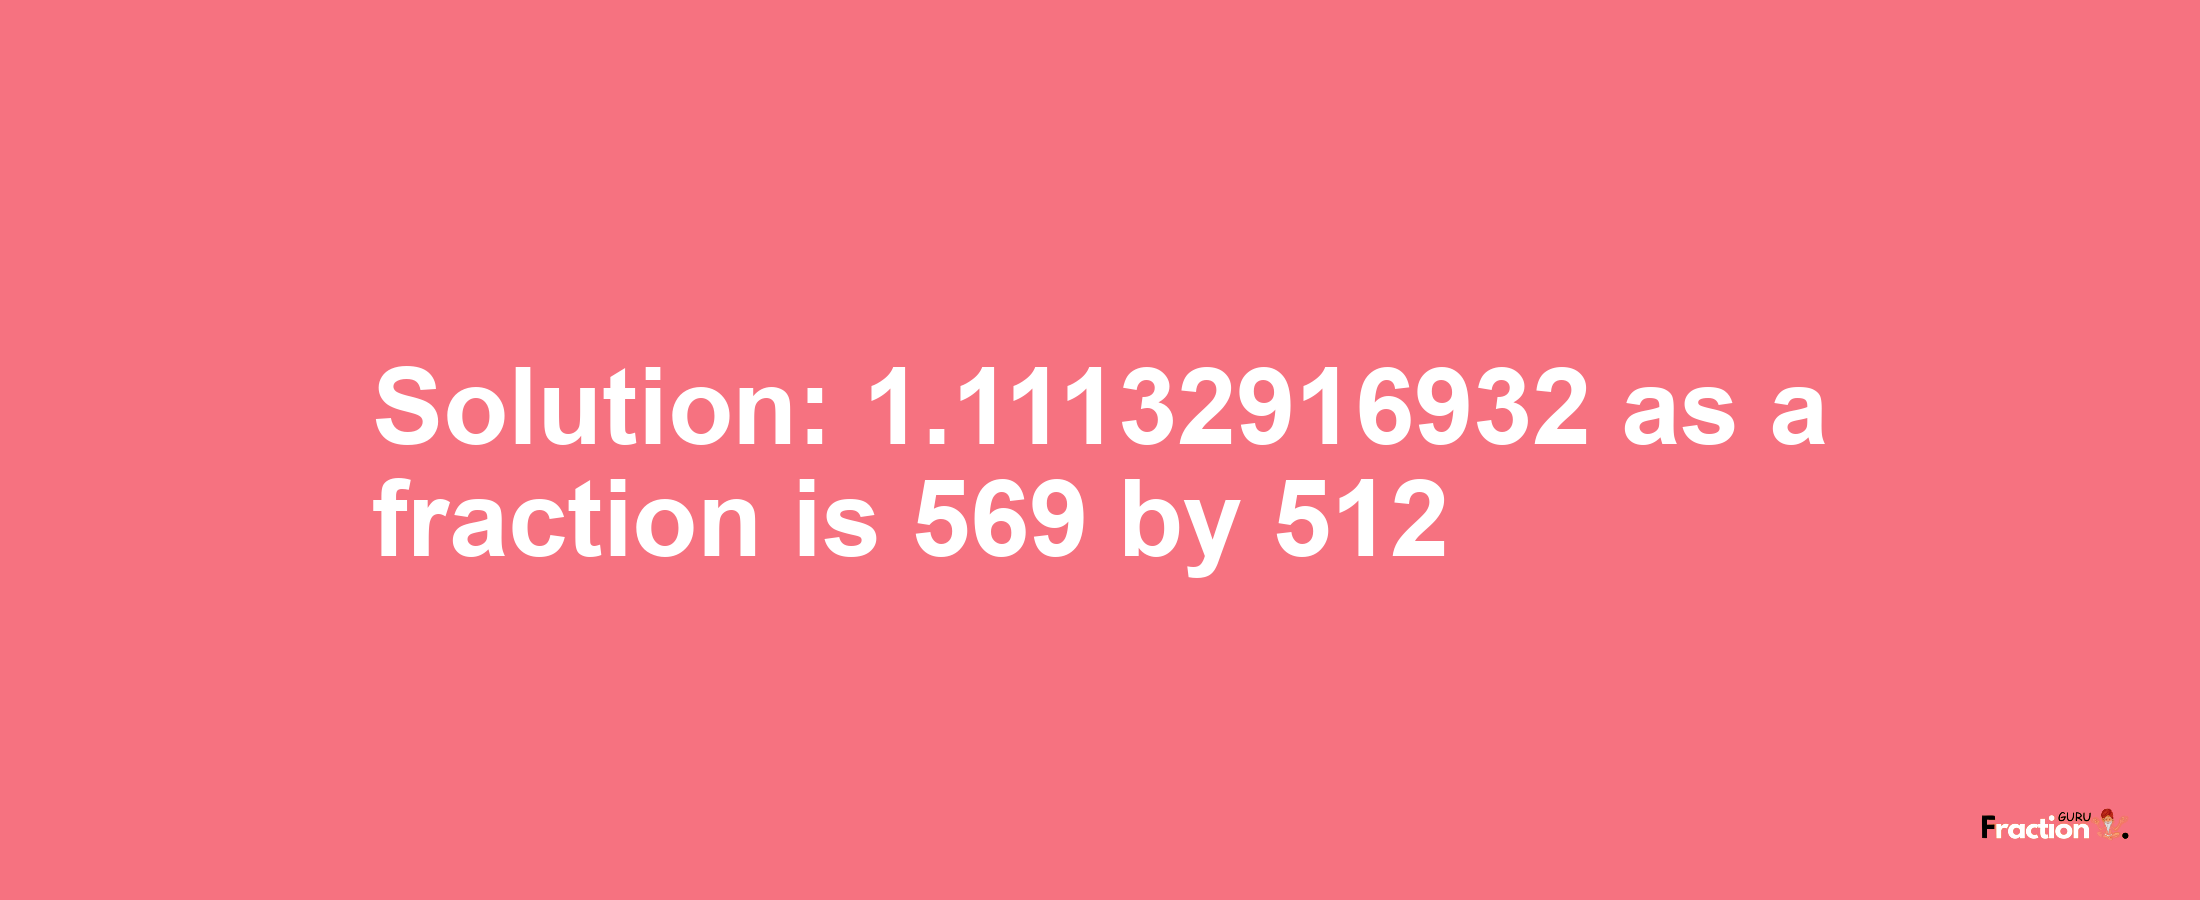 Solution:1.11132916932 as a fraction is 569/512